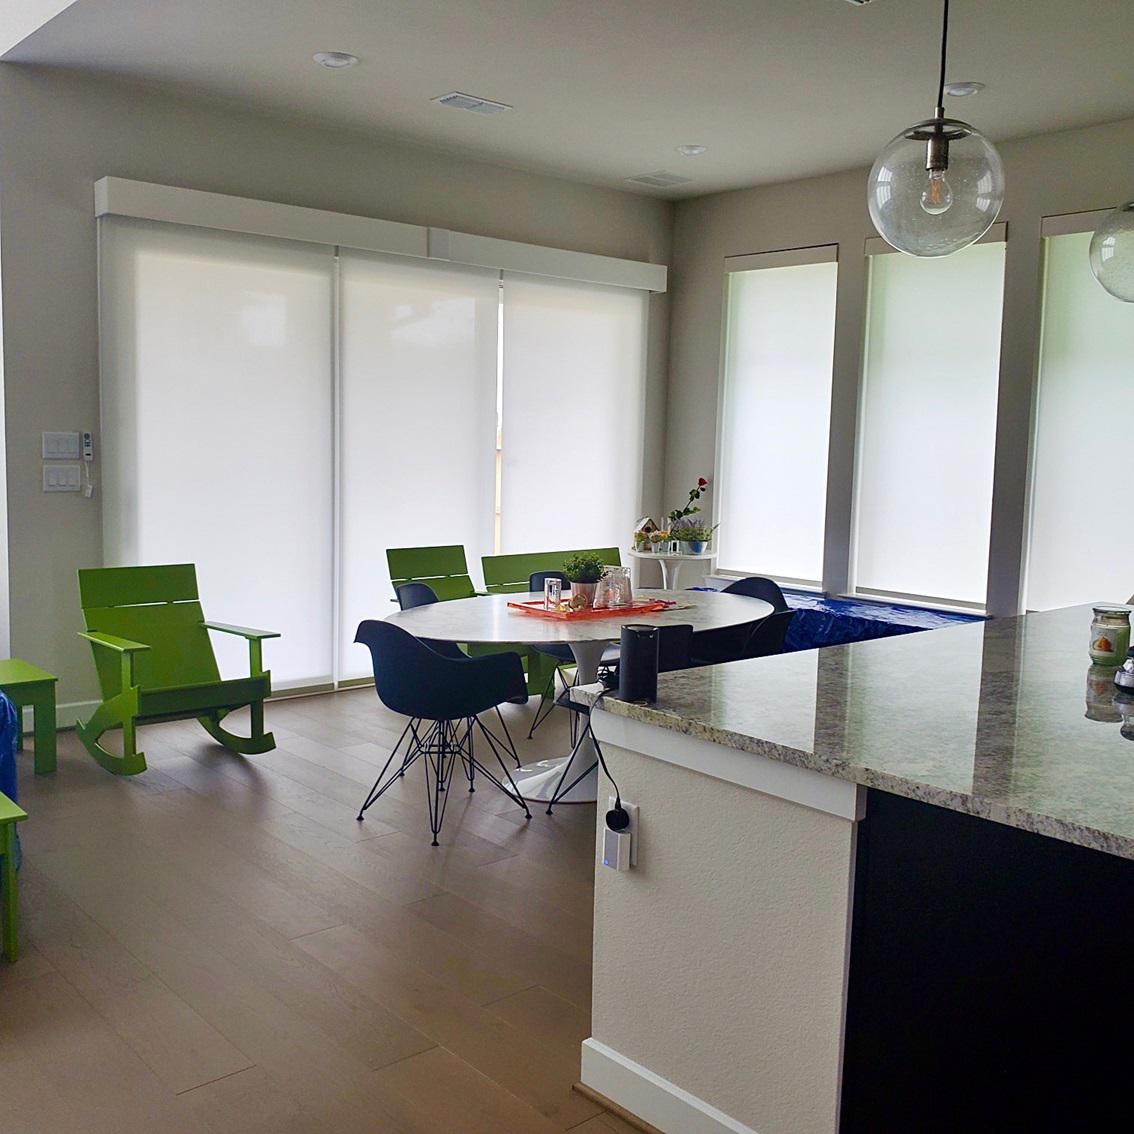 Keep that bright, sunny feeling in your home without the glare! This space from Katy shows you how to do it with our Roller Shades and Valances!